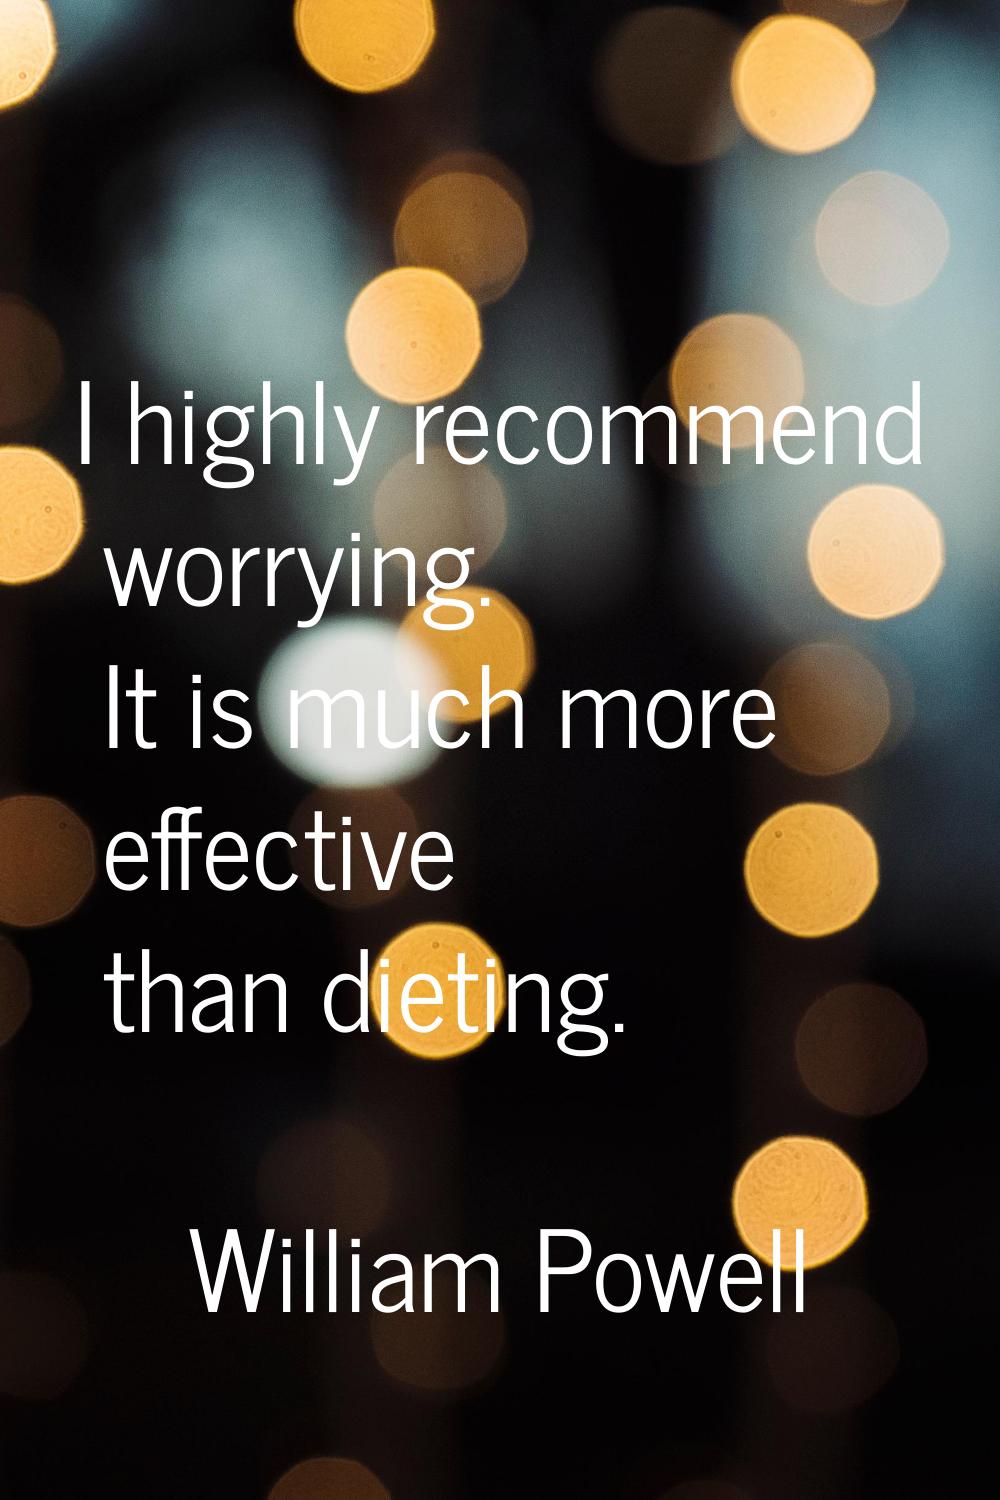 I highly recommend worrying. It is much more effective than dieting.